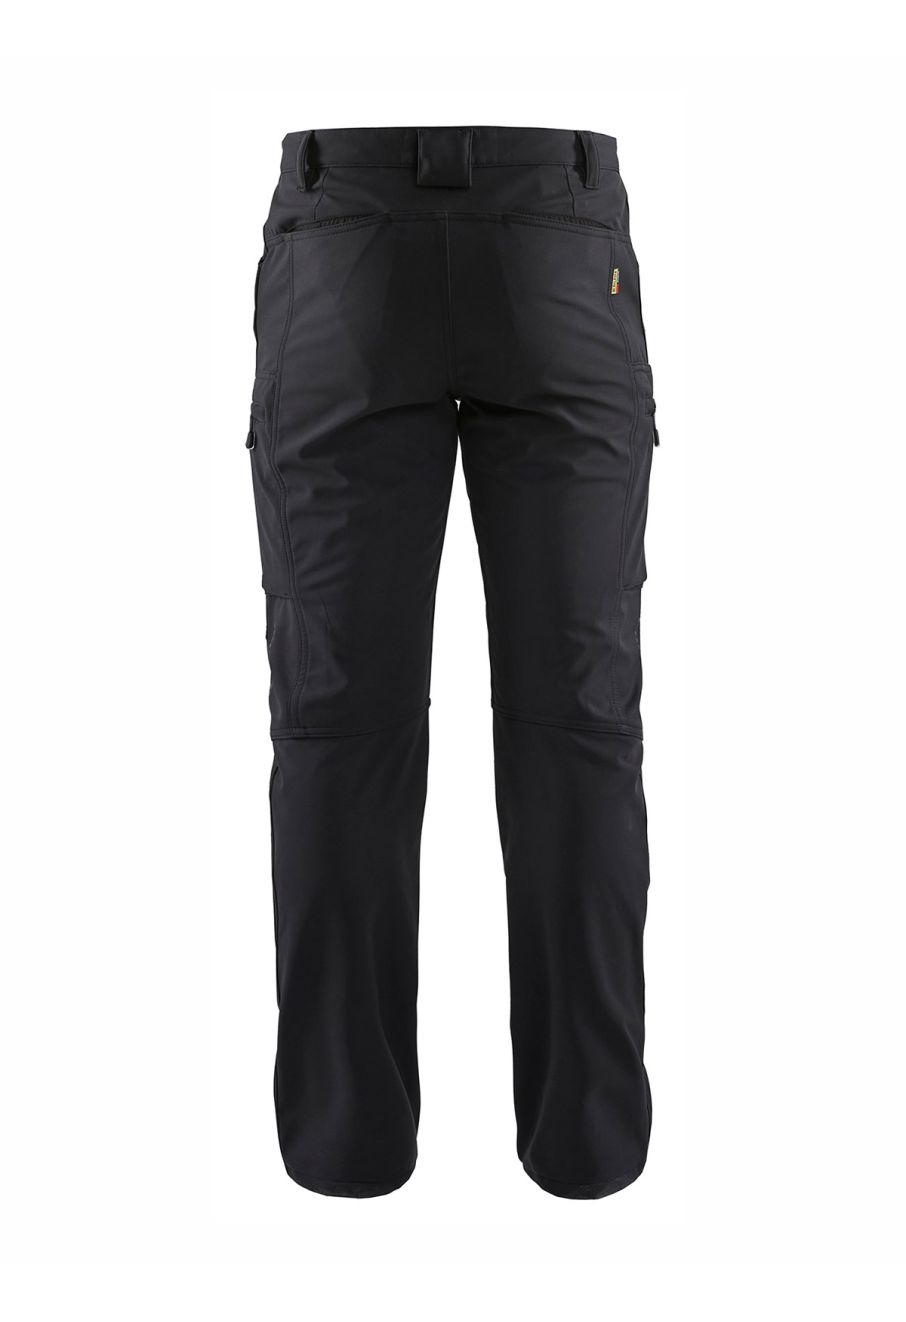 Buy Tranemo Stretch FR work trousers at Cheap-workwear.com